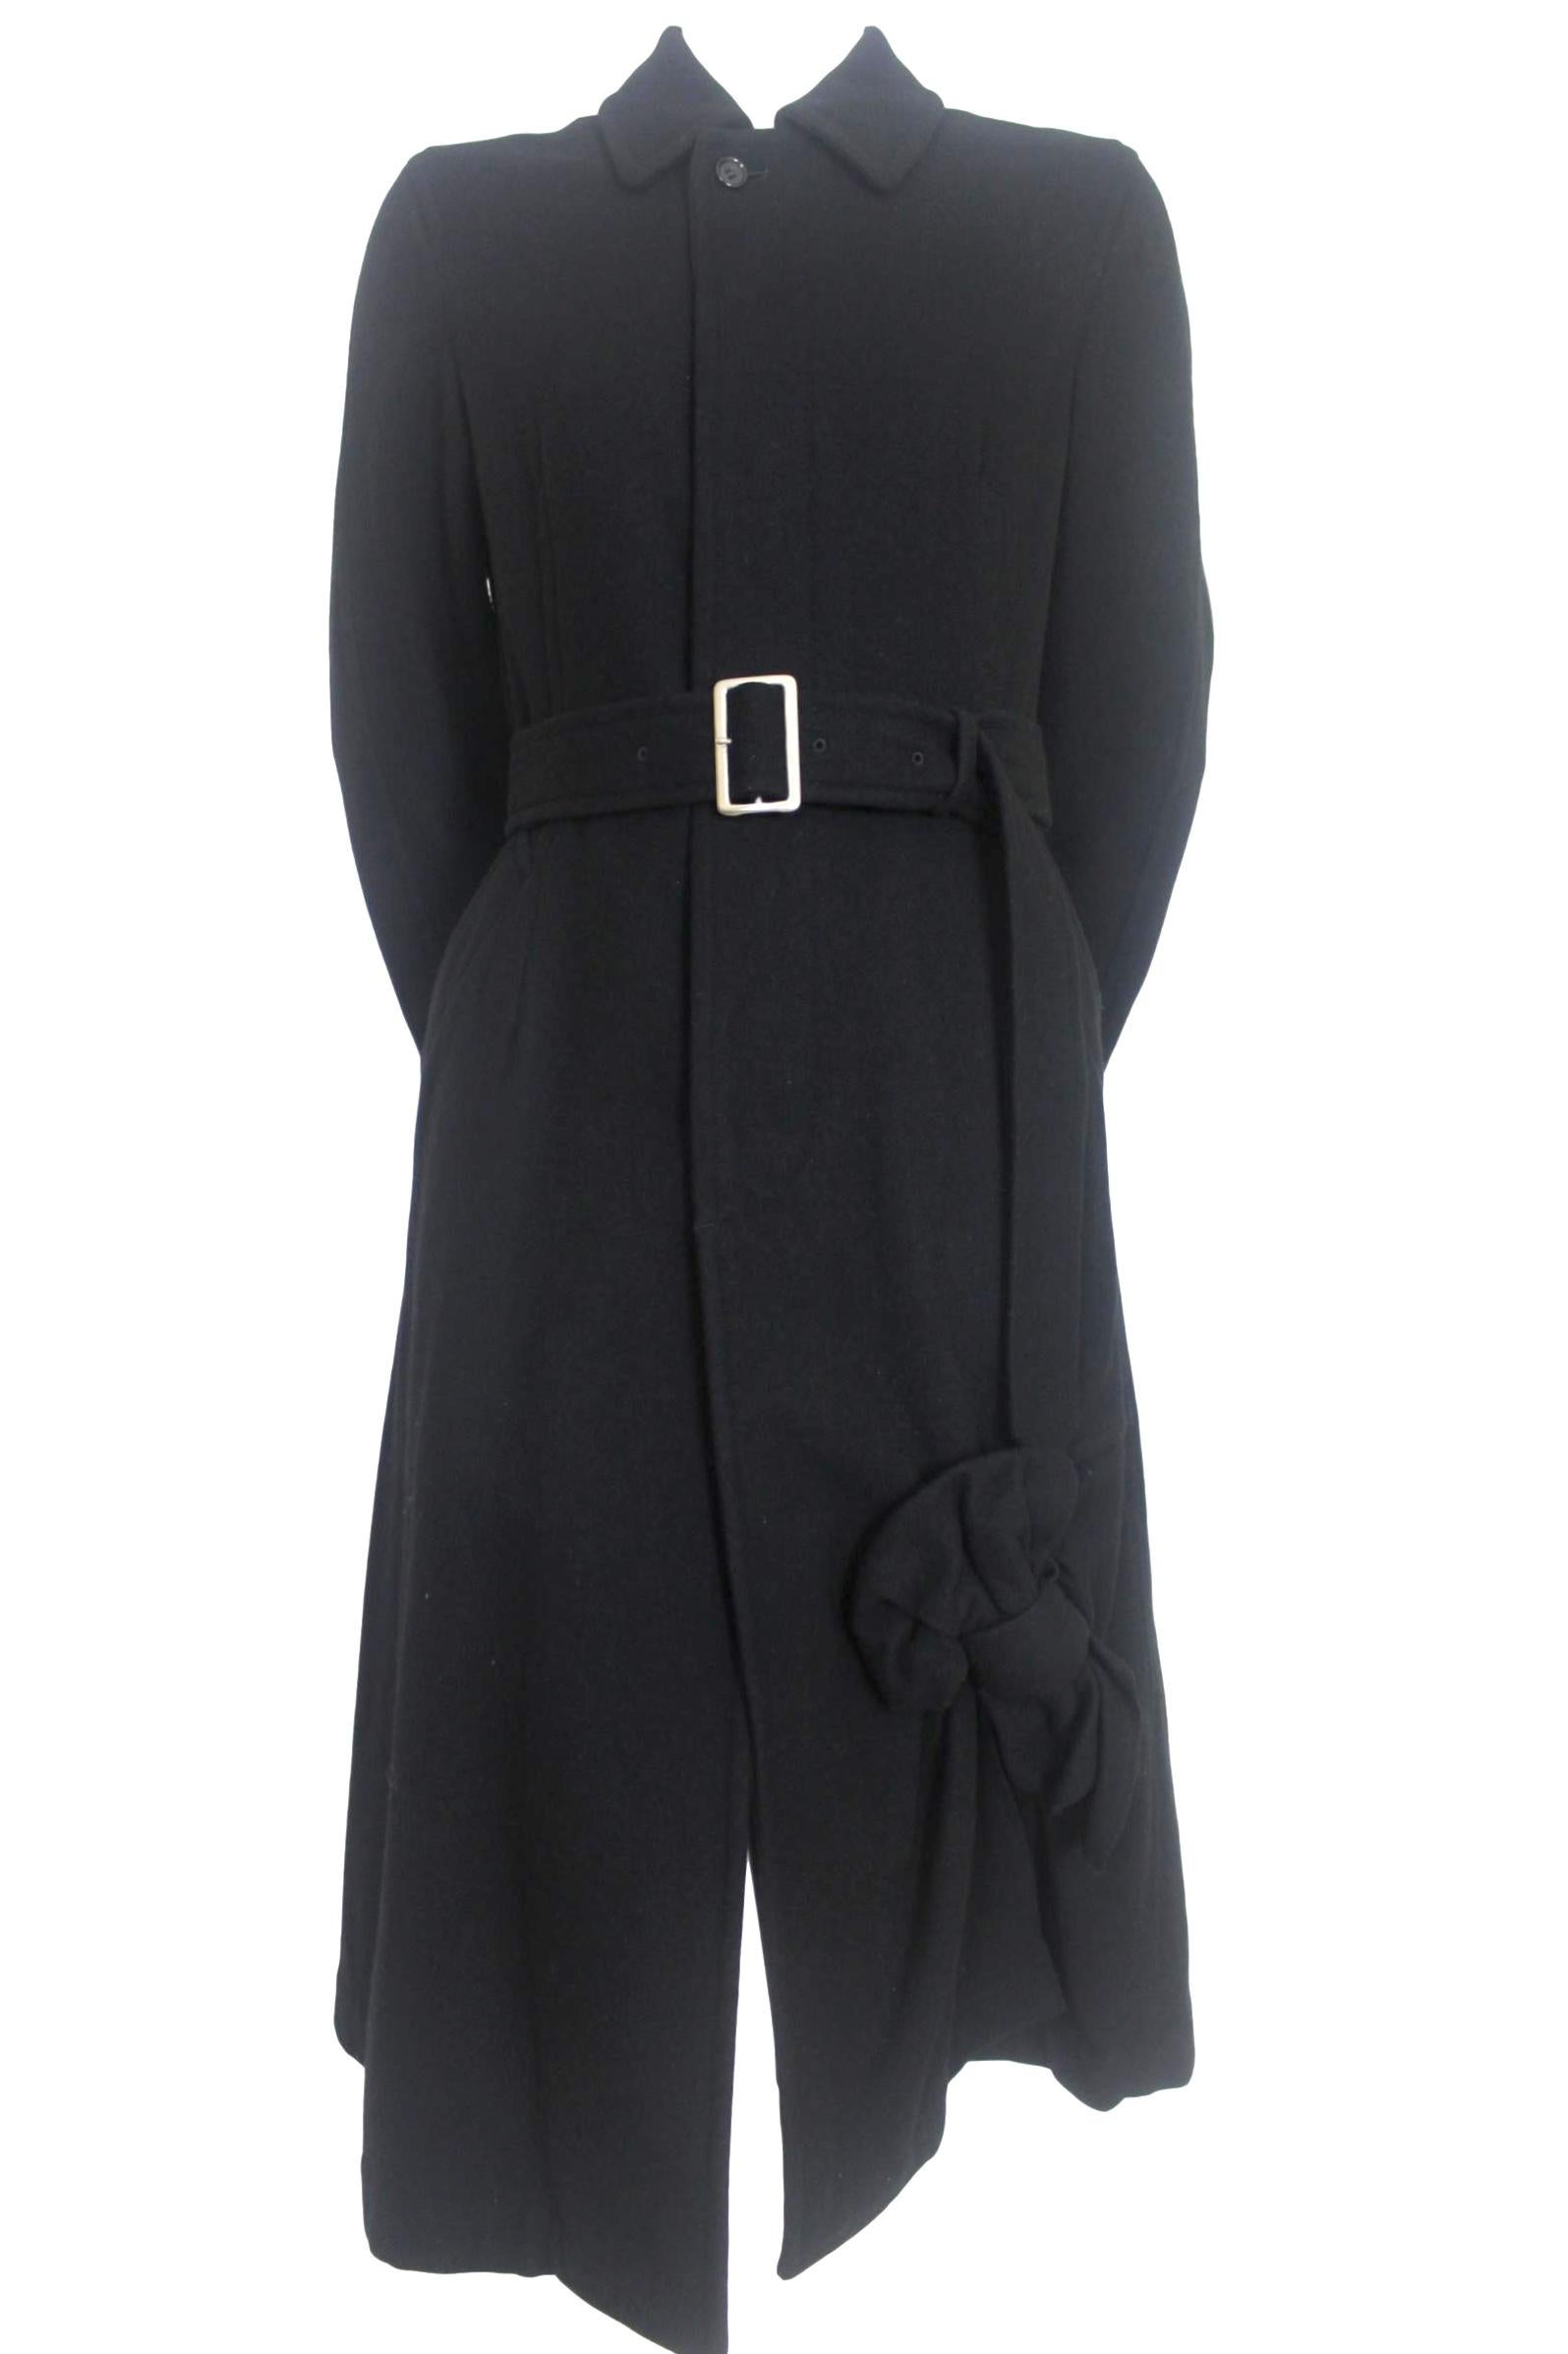 Comme des Garcons 2006 Collection Wool Coat with Bow Decoration In Excellent Condition For Sale In Bath, GB